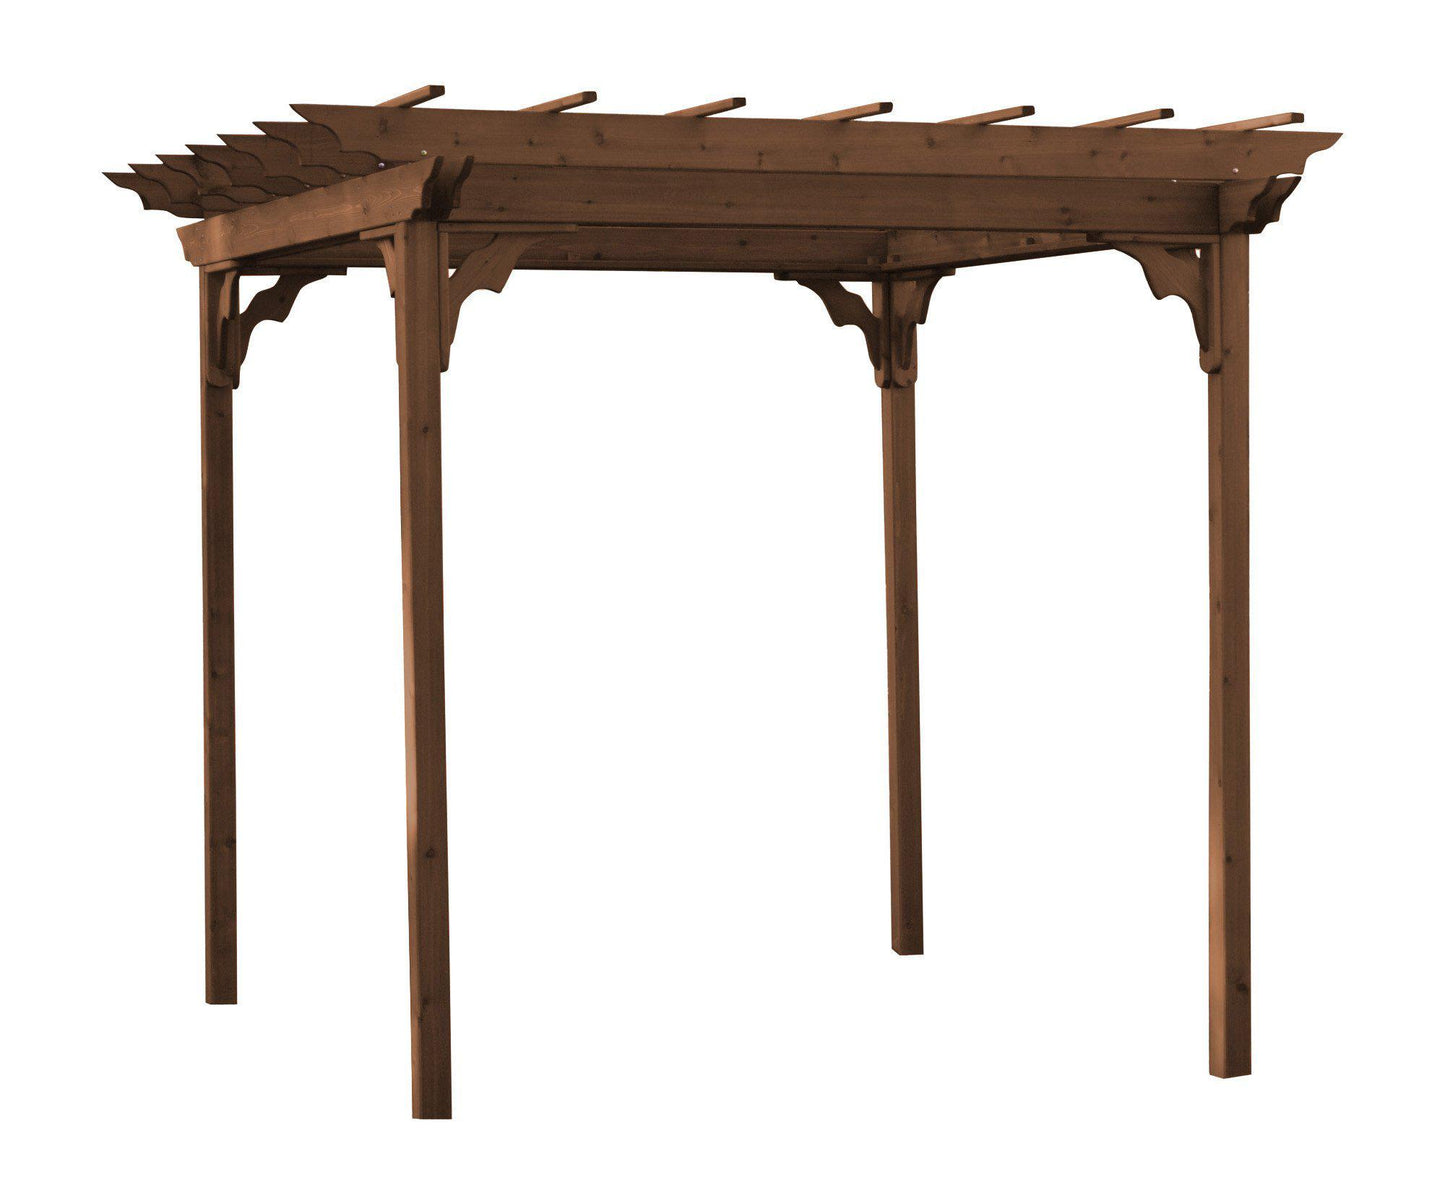 A&L Furniture Co. Western Red Cedar 6' x 8' Pergola W/ Swing Hangers - LEAD TIME TO SHIP 4 WEEKS OR LESS